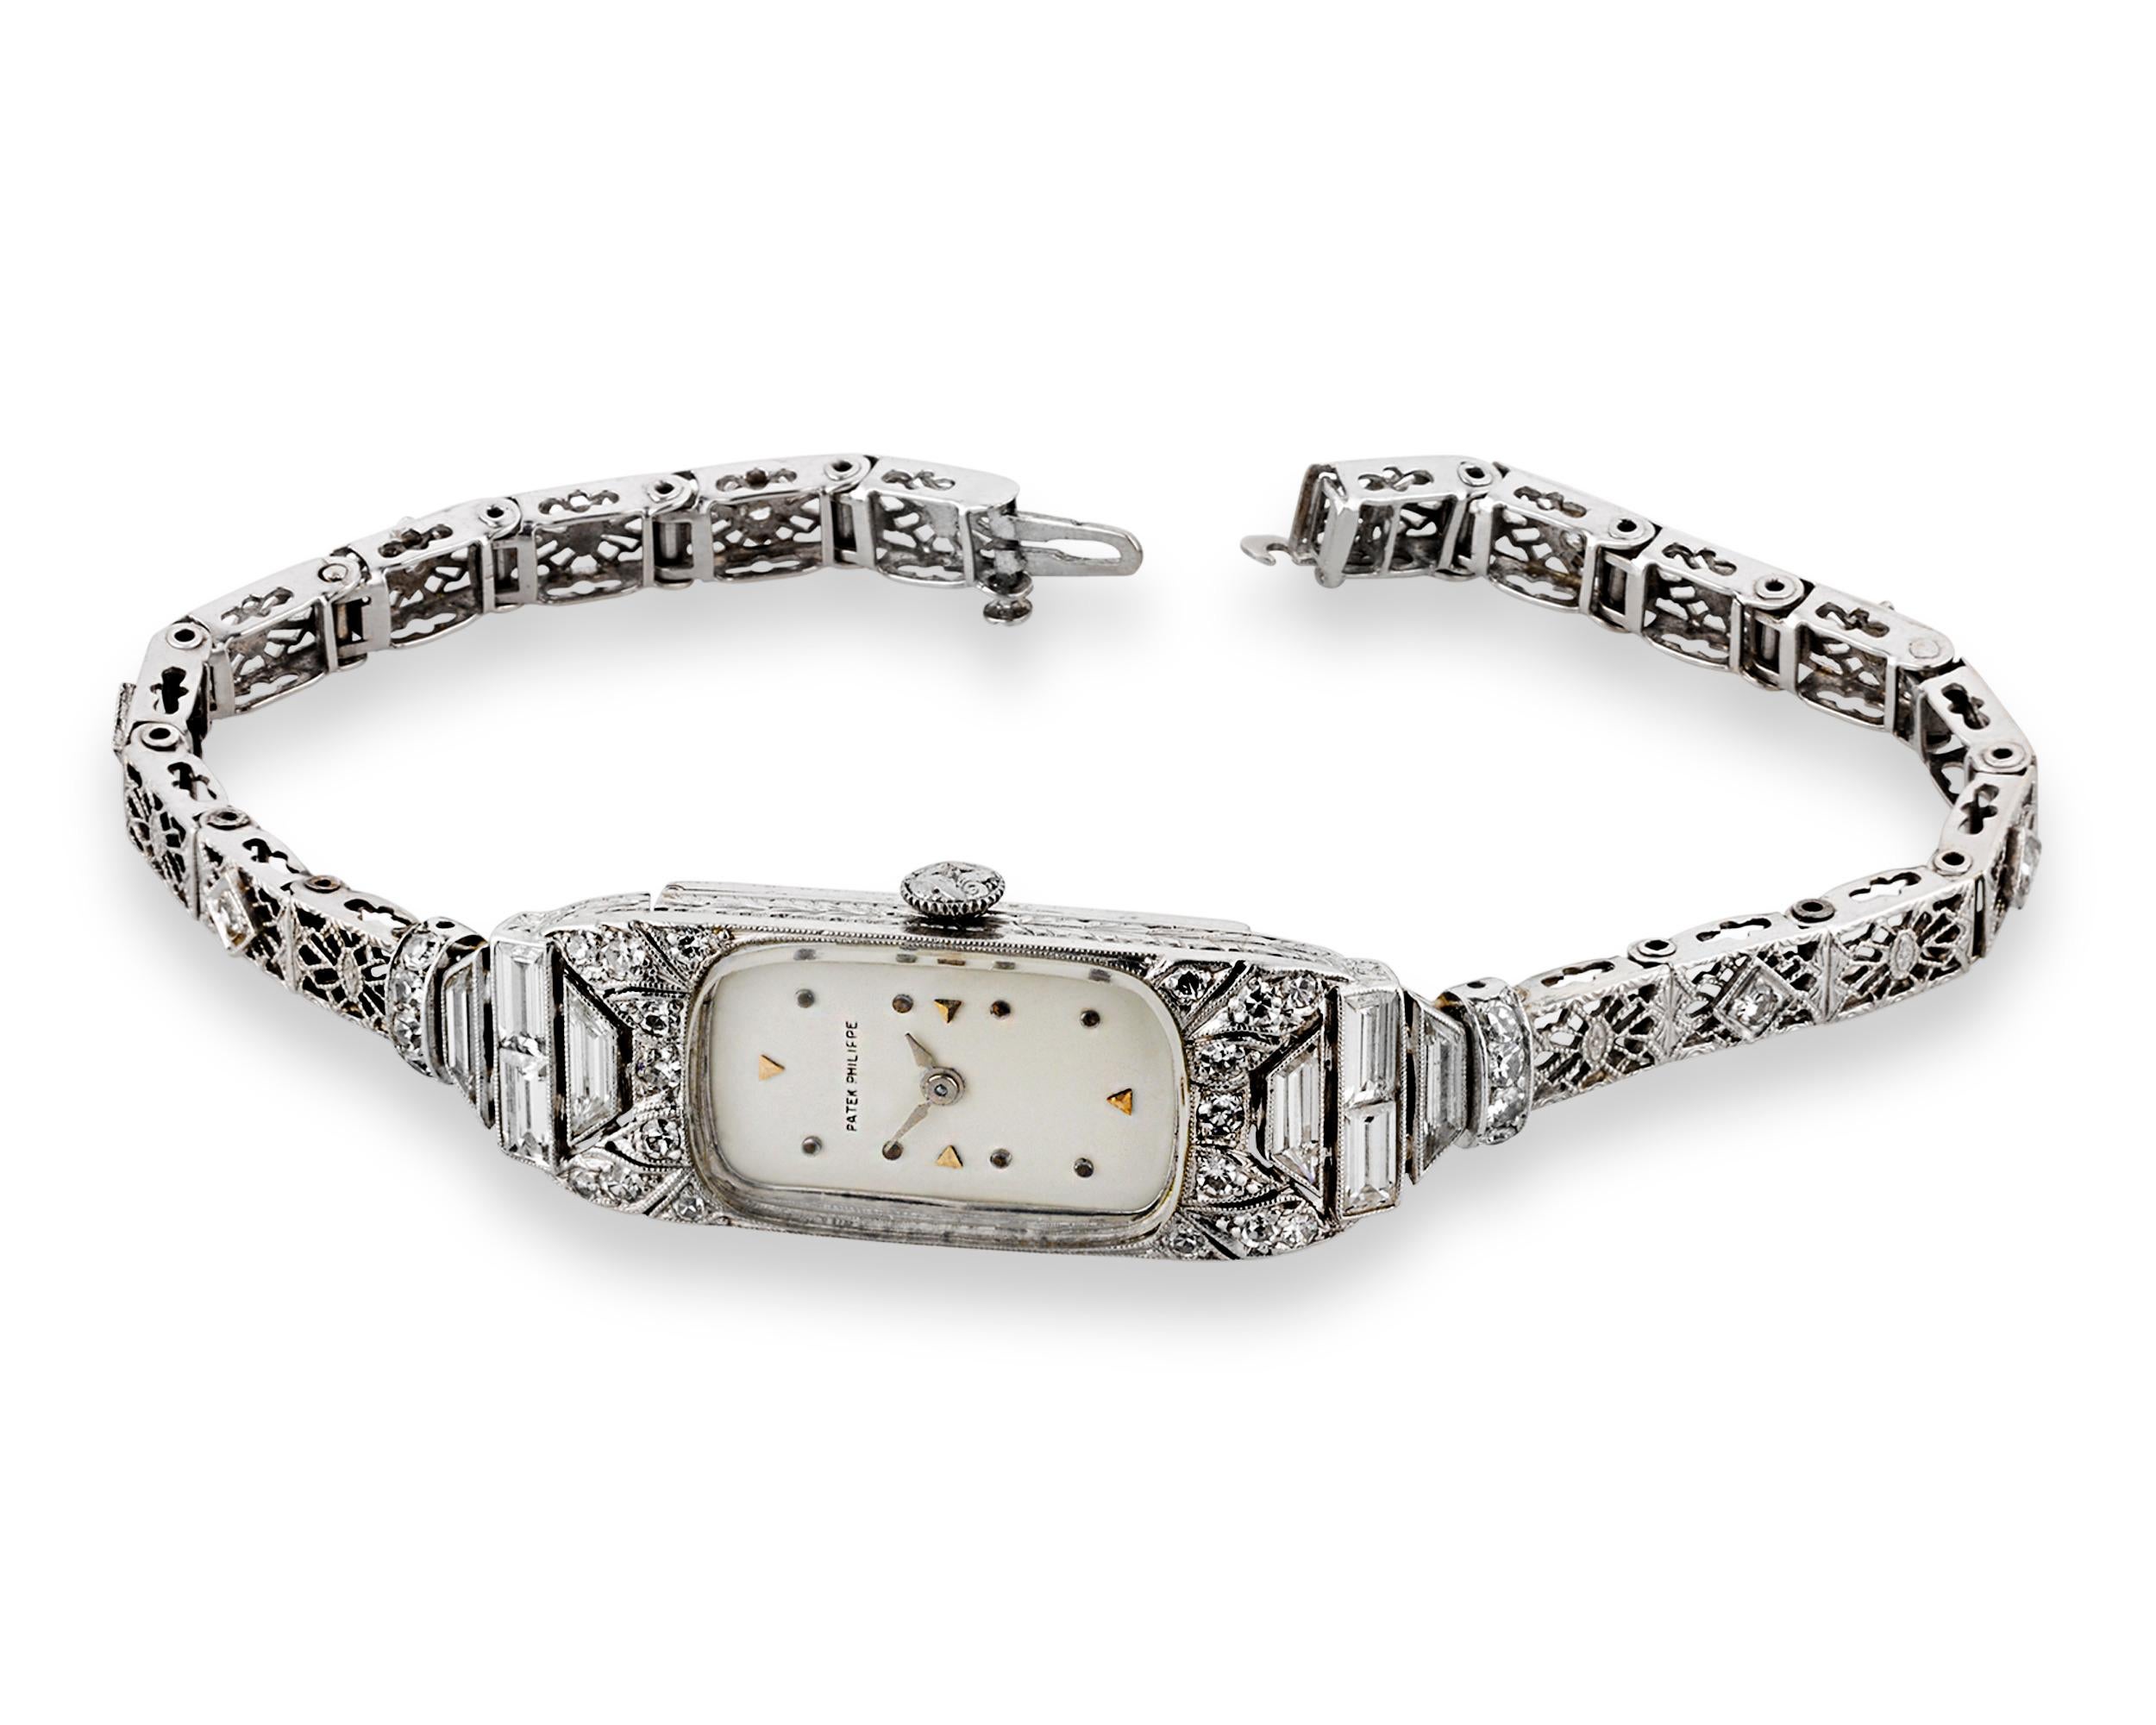 Patek Philippe, the renowned Swiss watchmaker, is synonymous with technical mastery, luxurious exclusivity and refined elegance. This exquisite wristwatch, crafted from 14K white gold and adorned with diamonds, exemplifies the celebrated aesthetic